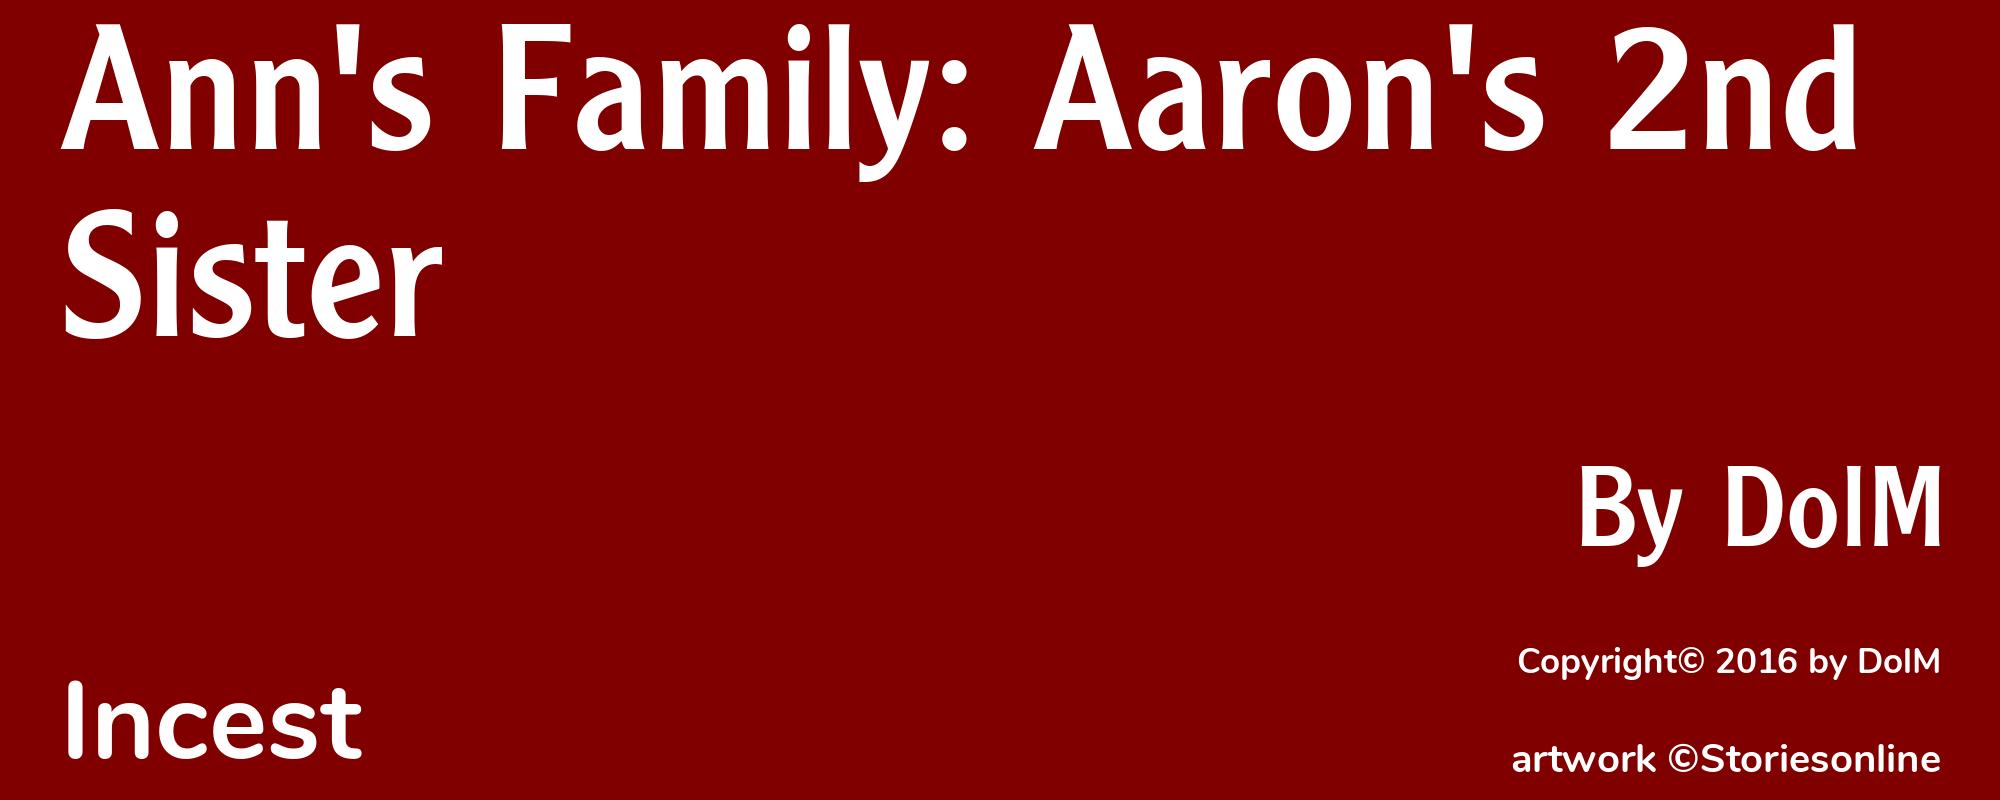 Ann's Family: Aaron's 2nd Sister - Cover